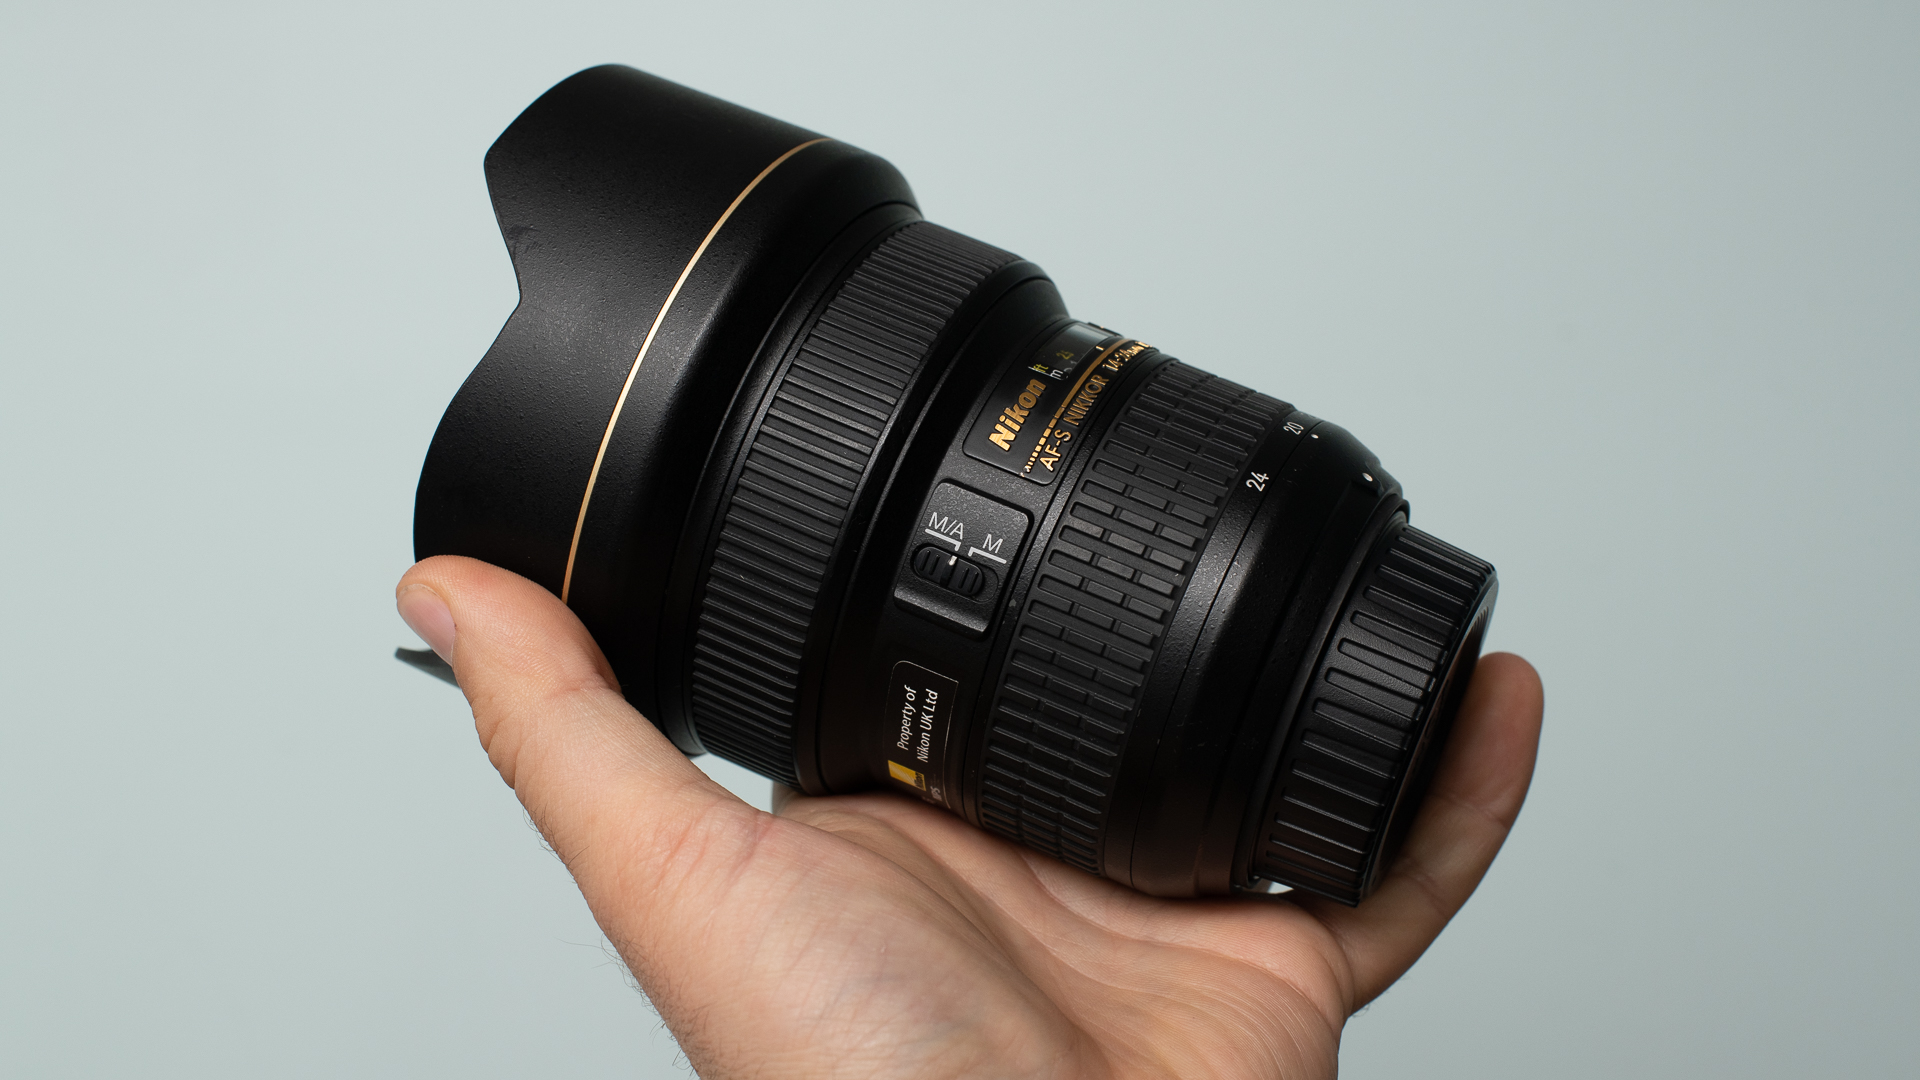 Image shows the Nikon AF-S 14-24mm f/2.8 ED in a person's hand.